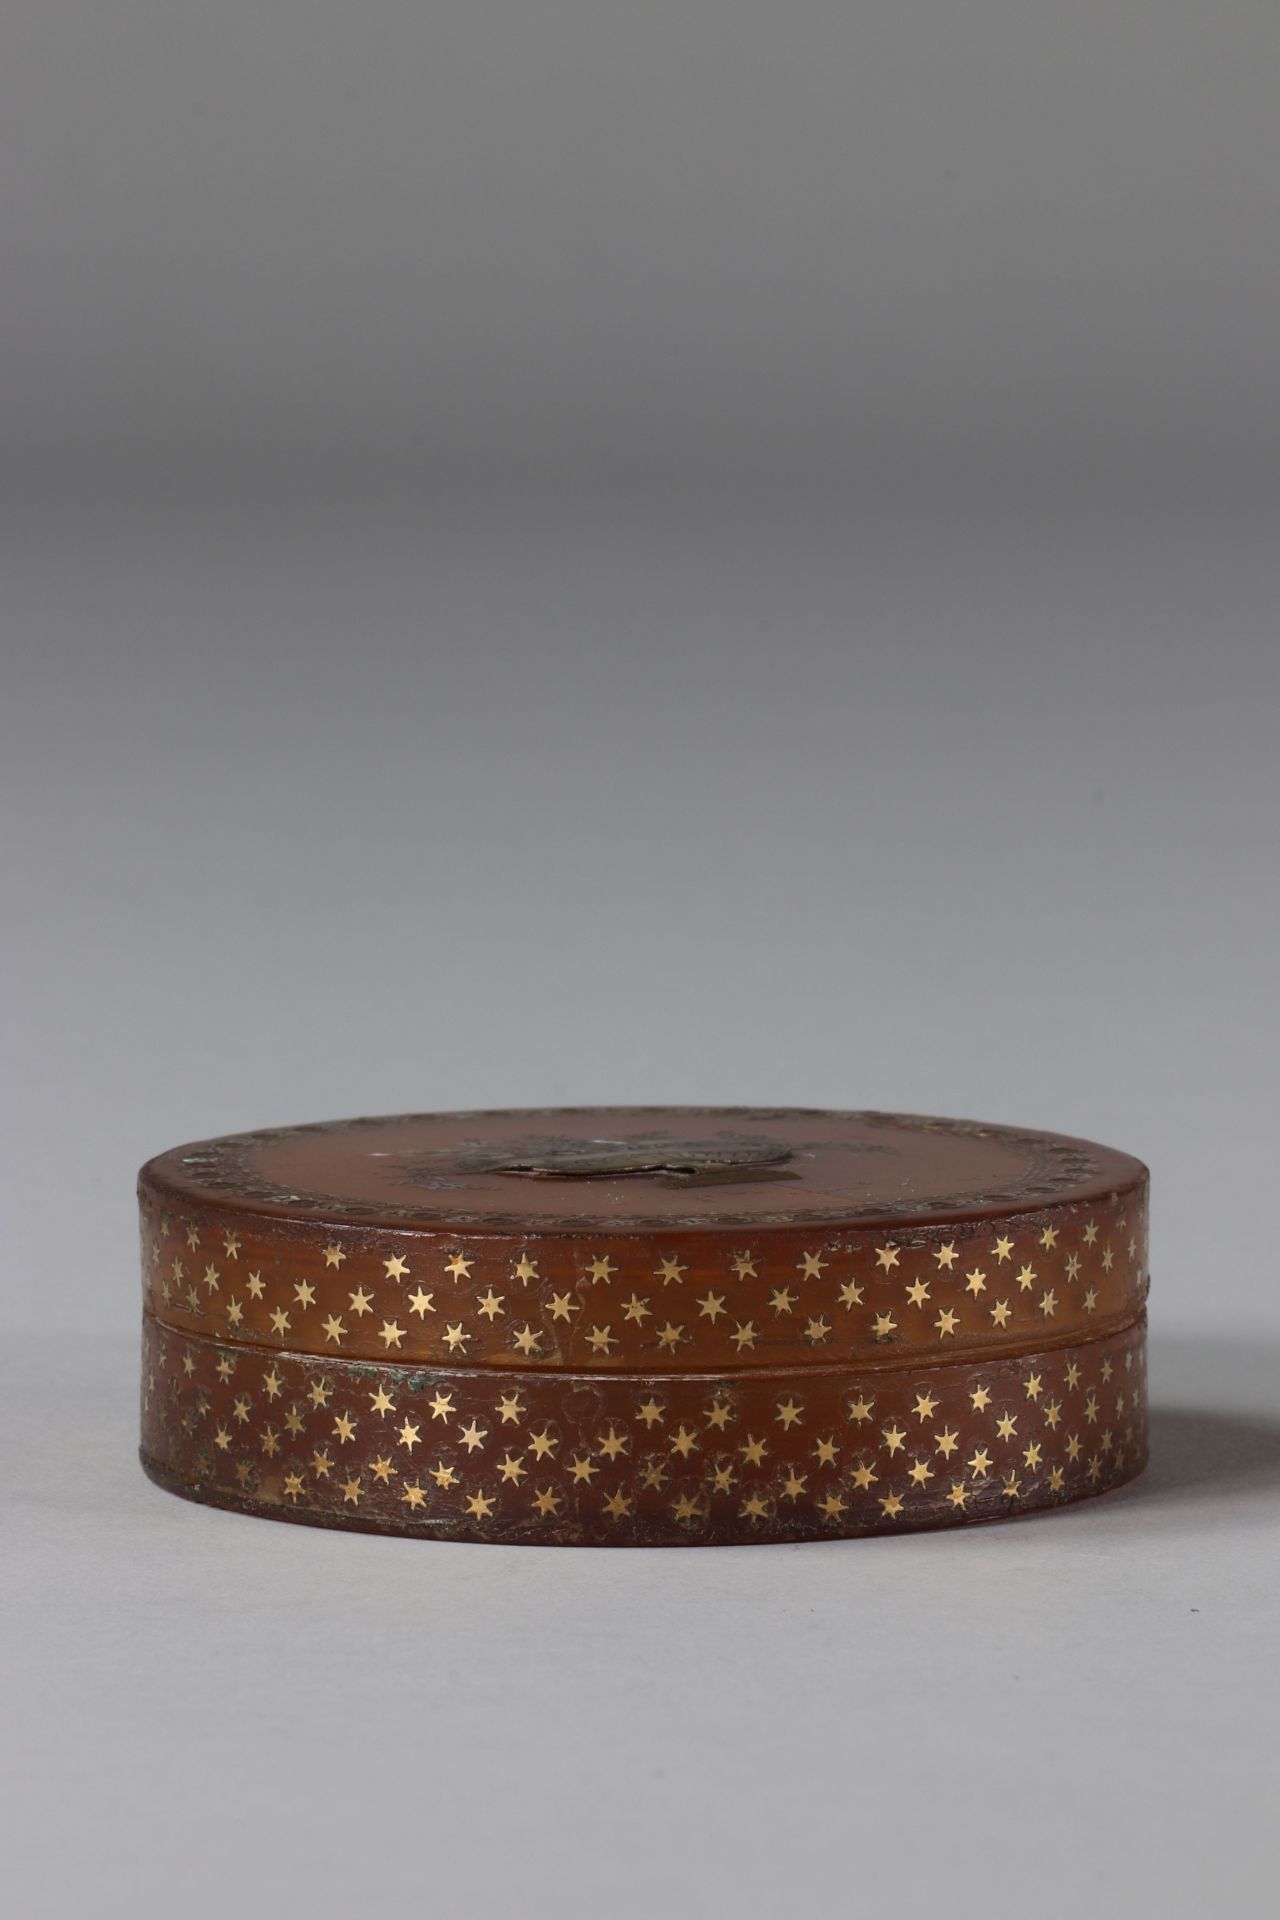 Louis XVI box in scales and inlays of different golds. France at the end of the 18th century. - Image 2 of 3